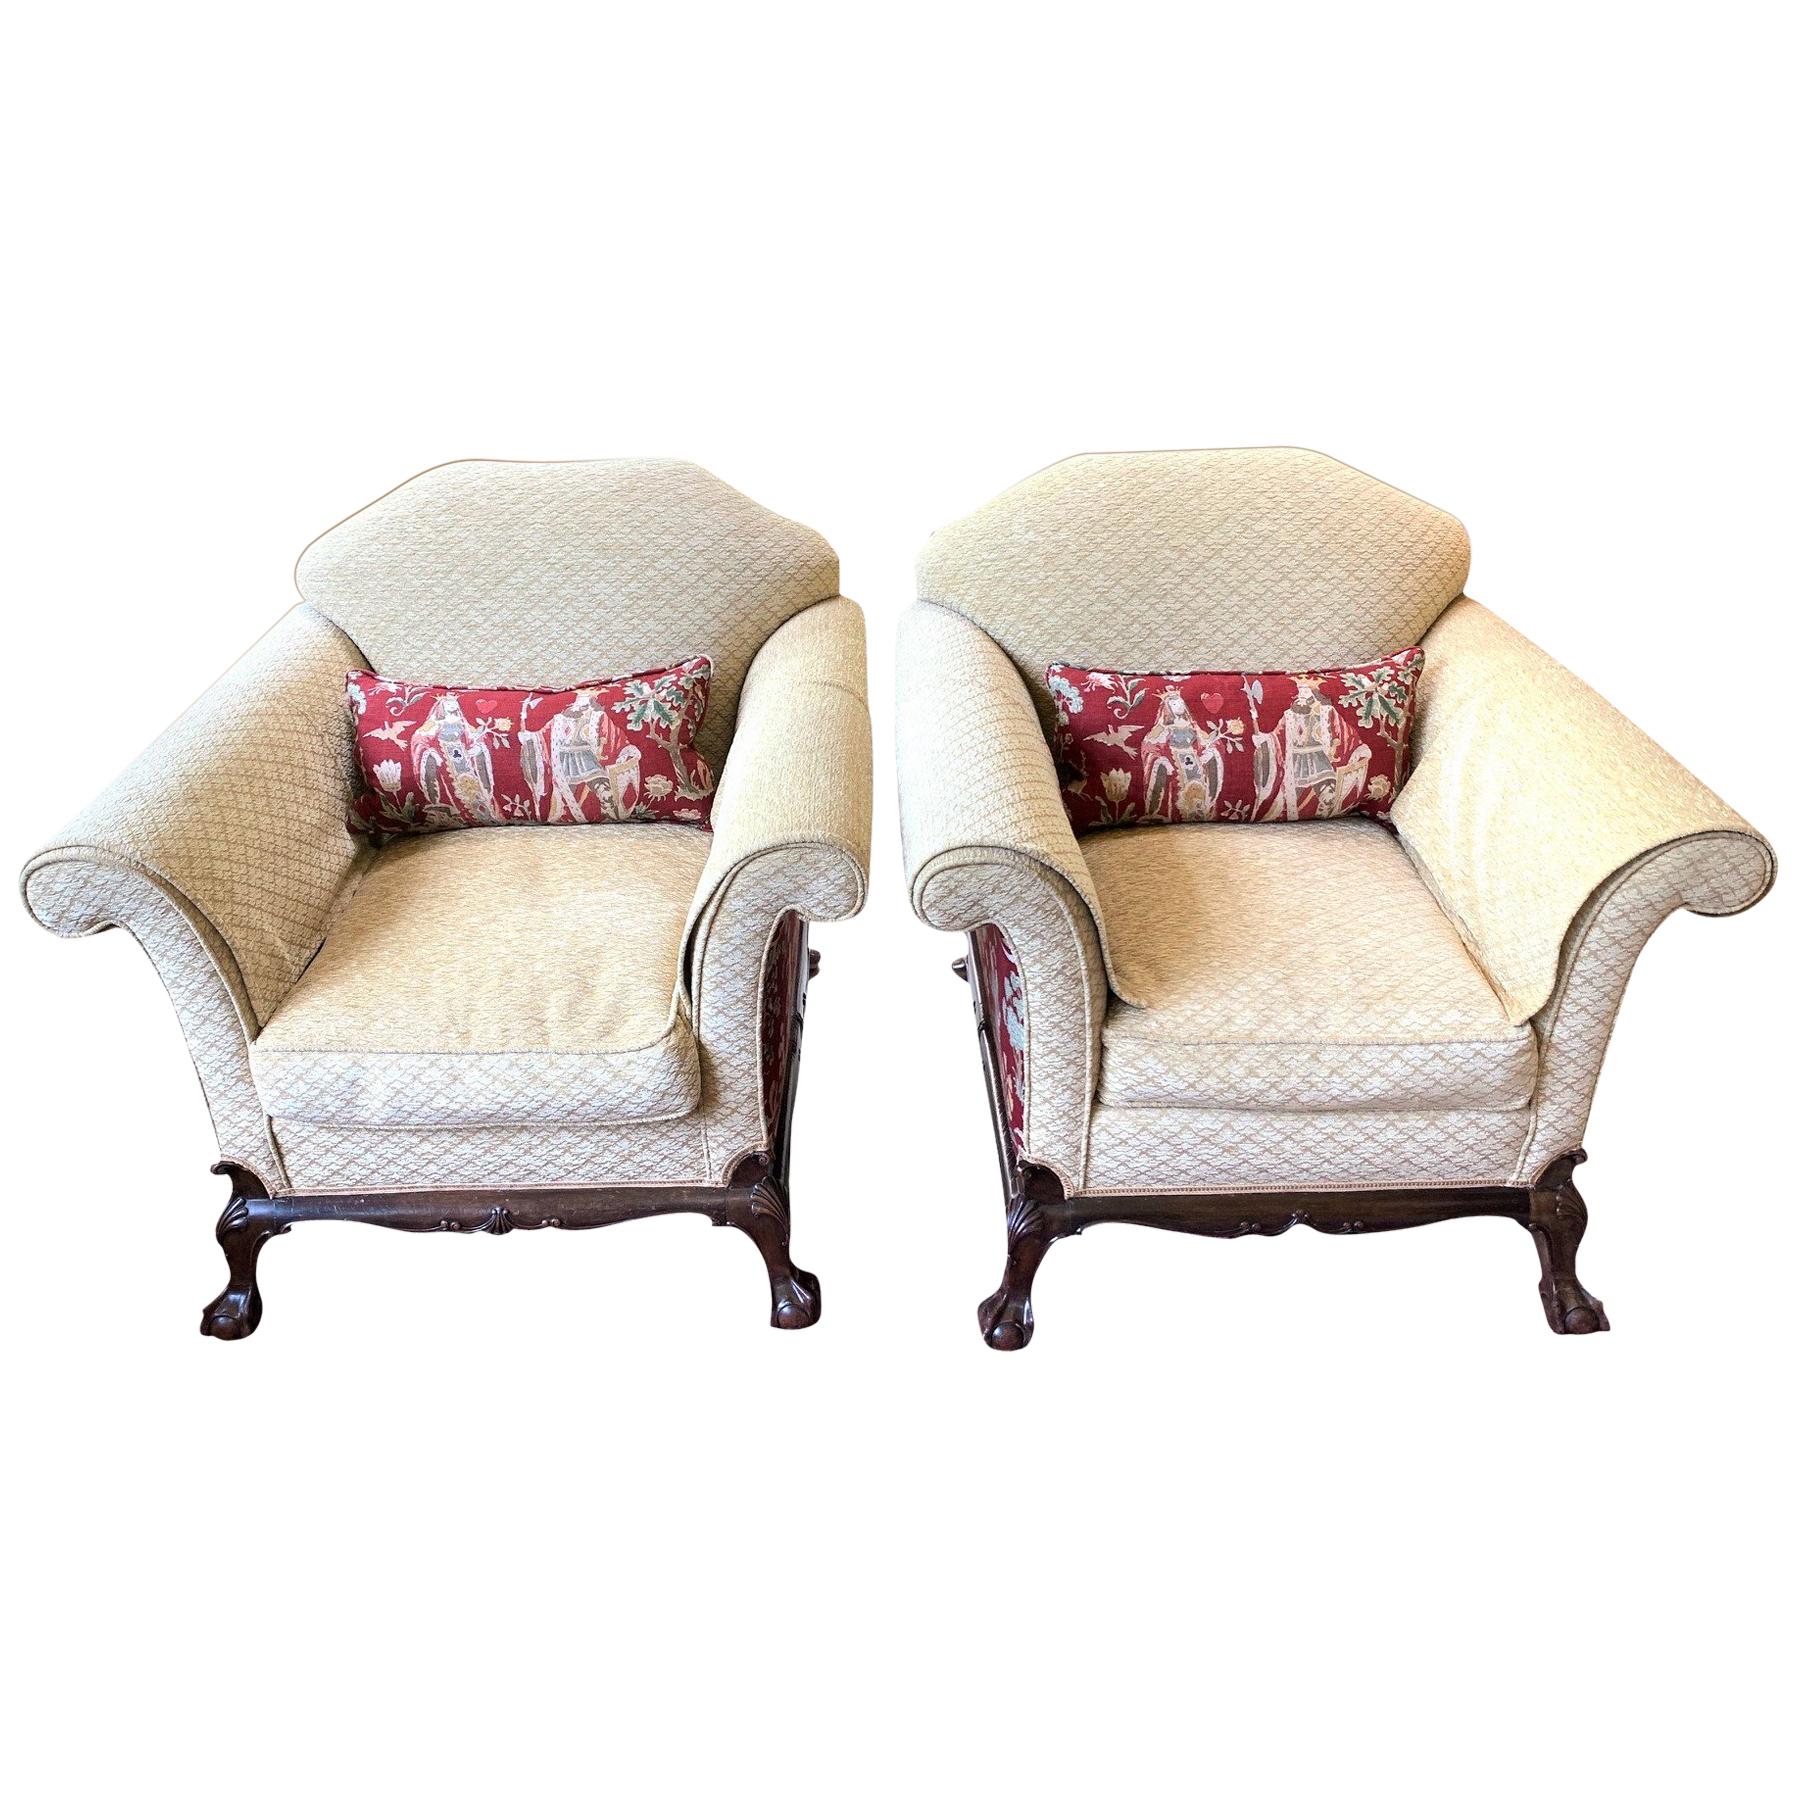 Antique Pair of English Upholstered Club Chairs